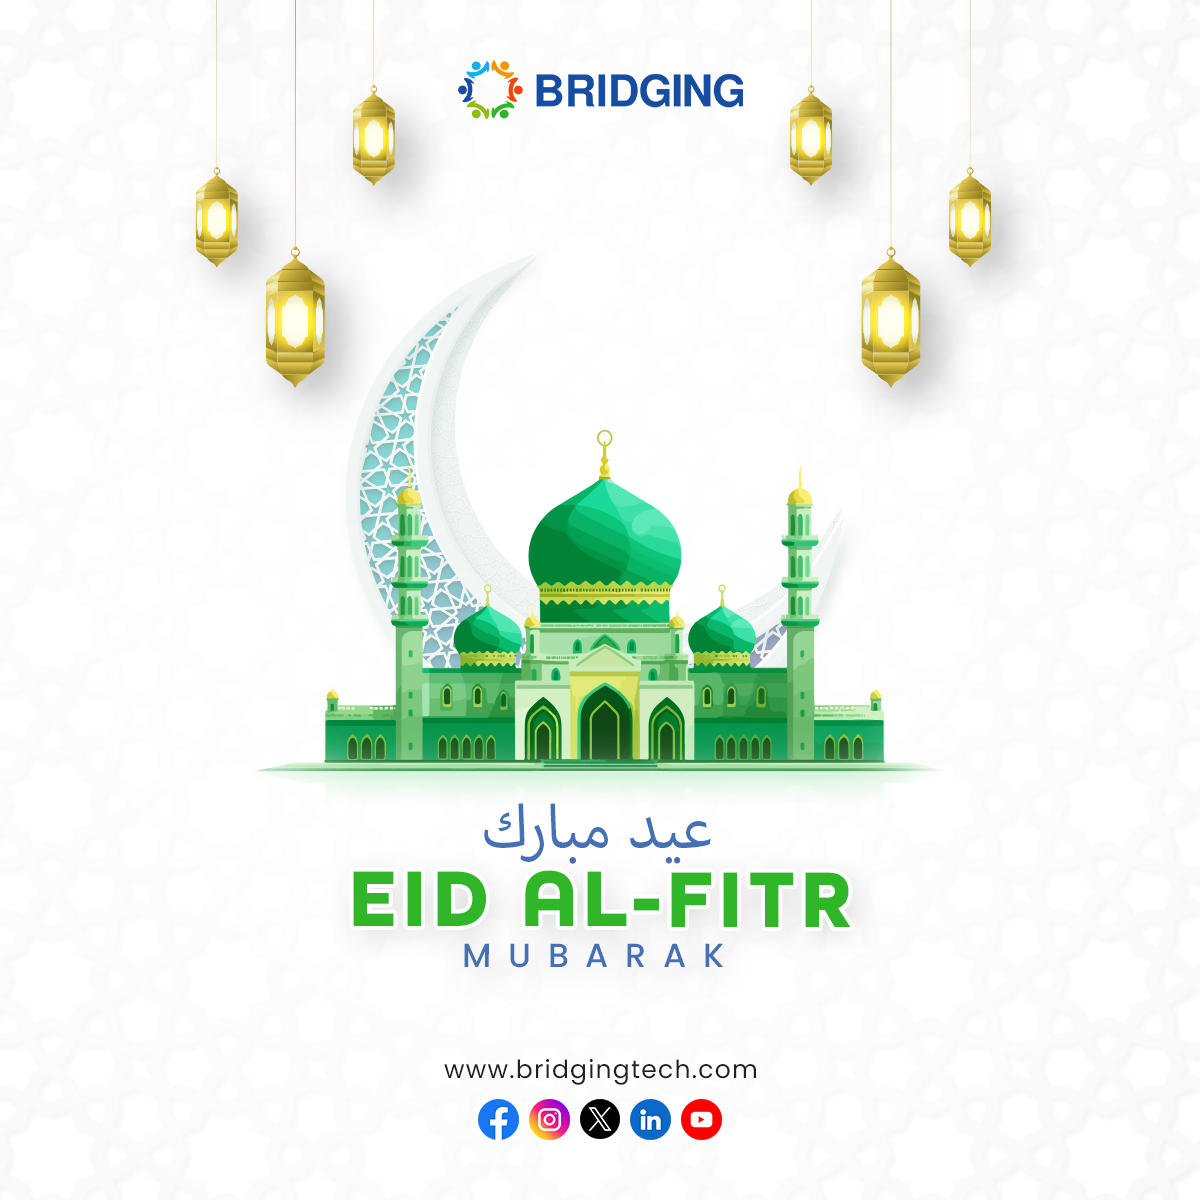 Wishing you and your family a happy and prosperous Eid-Al-Fitr. May this auspicious occasion bring peace, joy, and prosperity to your home. #Eid #Eid2024 #EidMubarak #EidAlFitr #EidAlFitr2024 #EidWishes #EidGreetings #EidBlessings #bridgingtechnologies